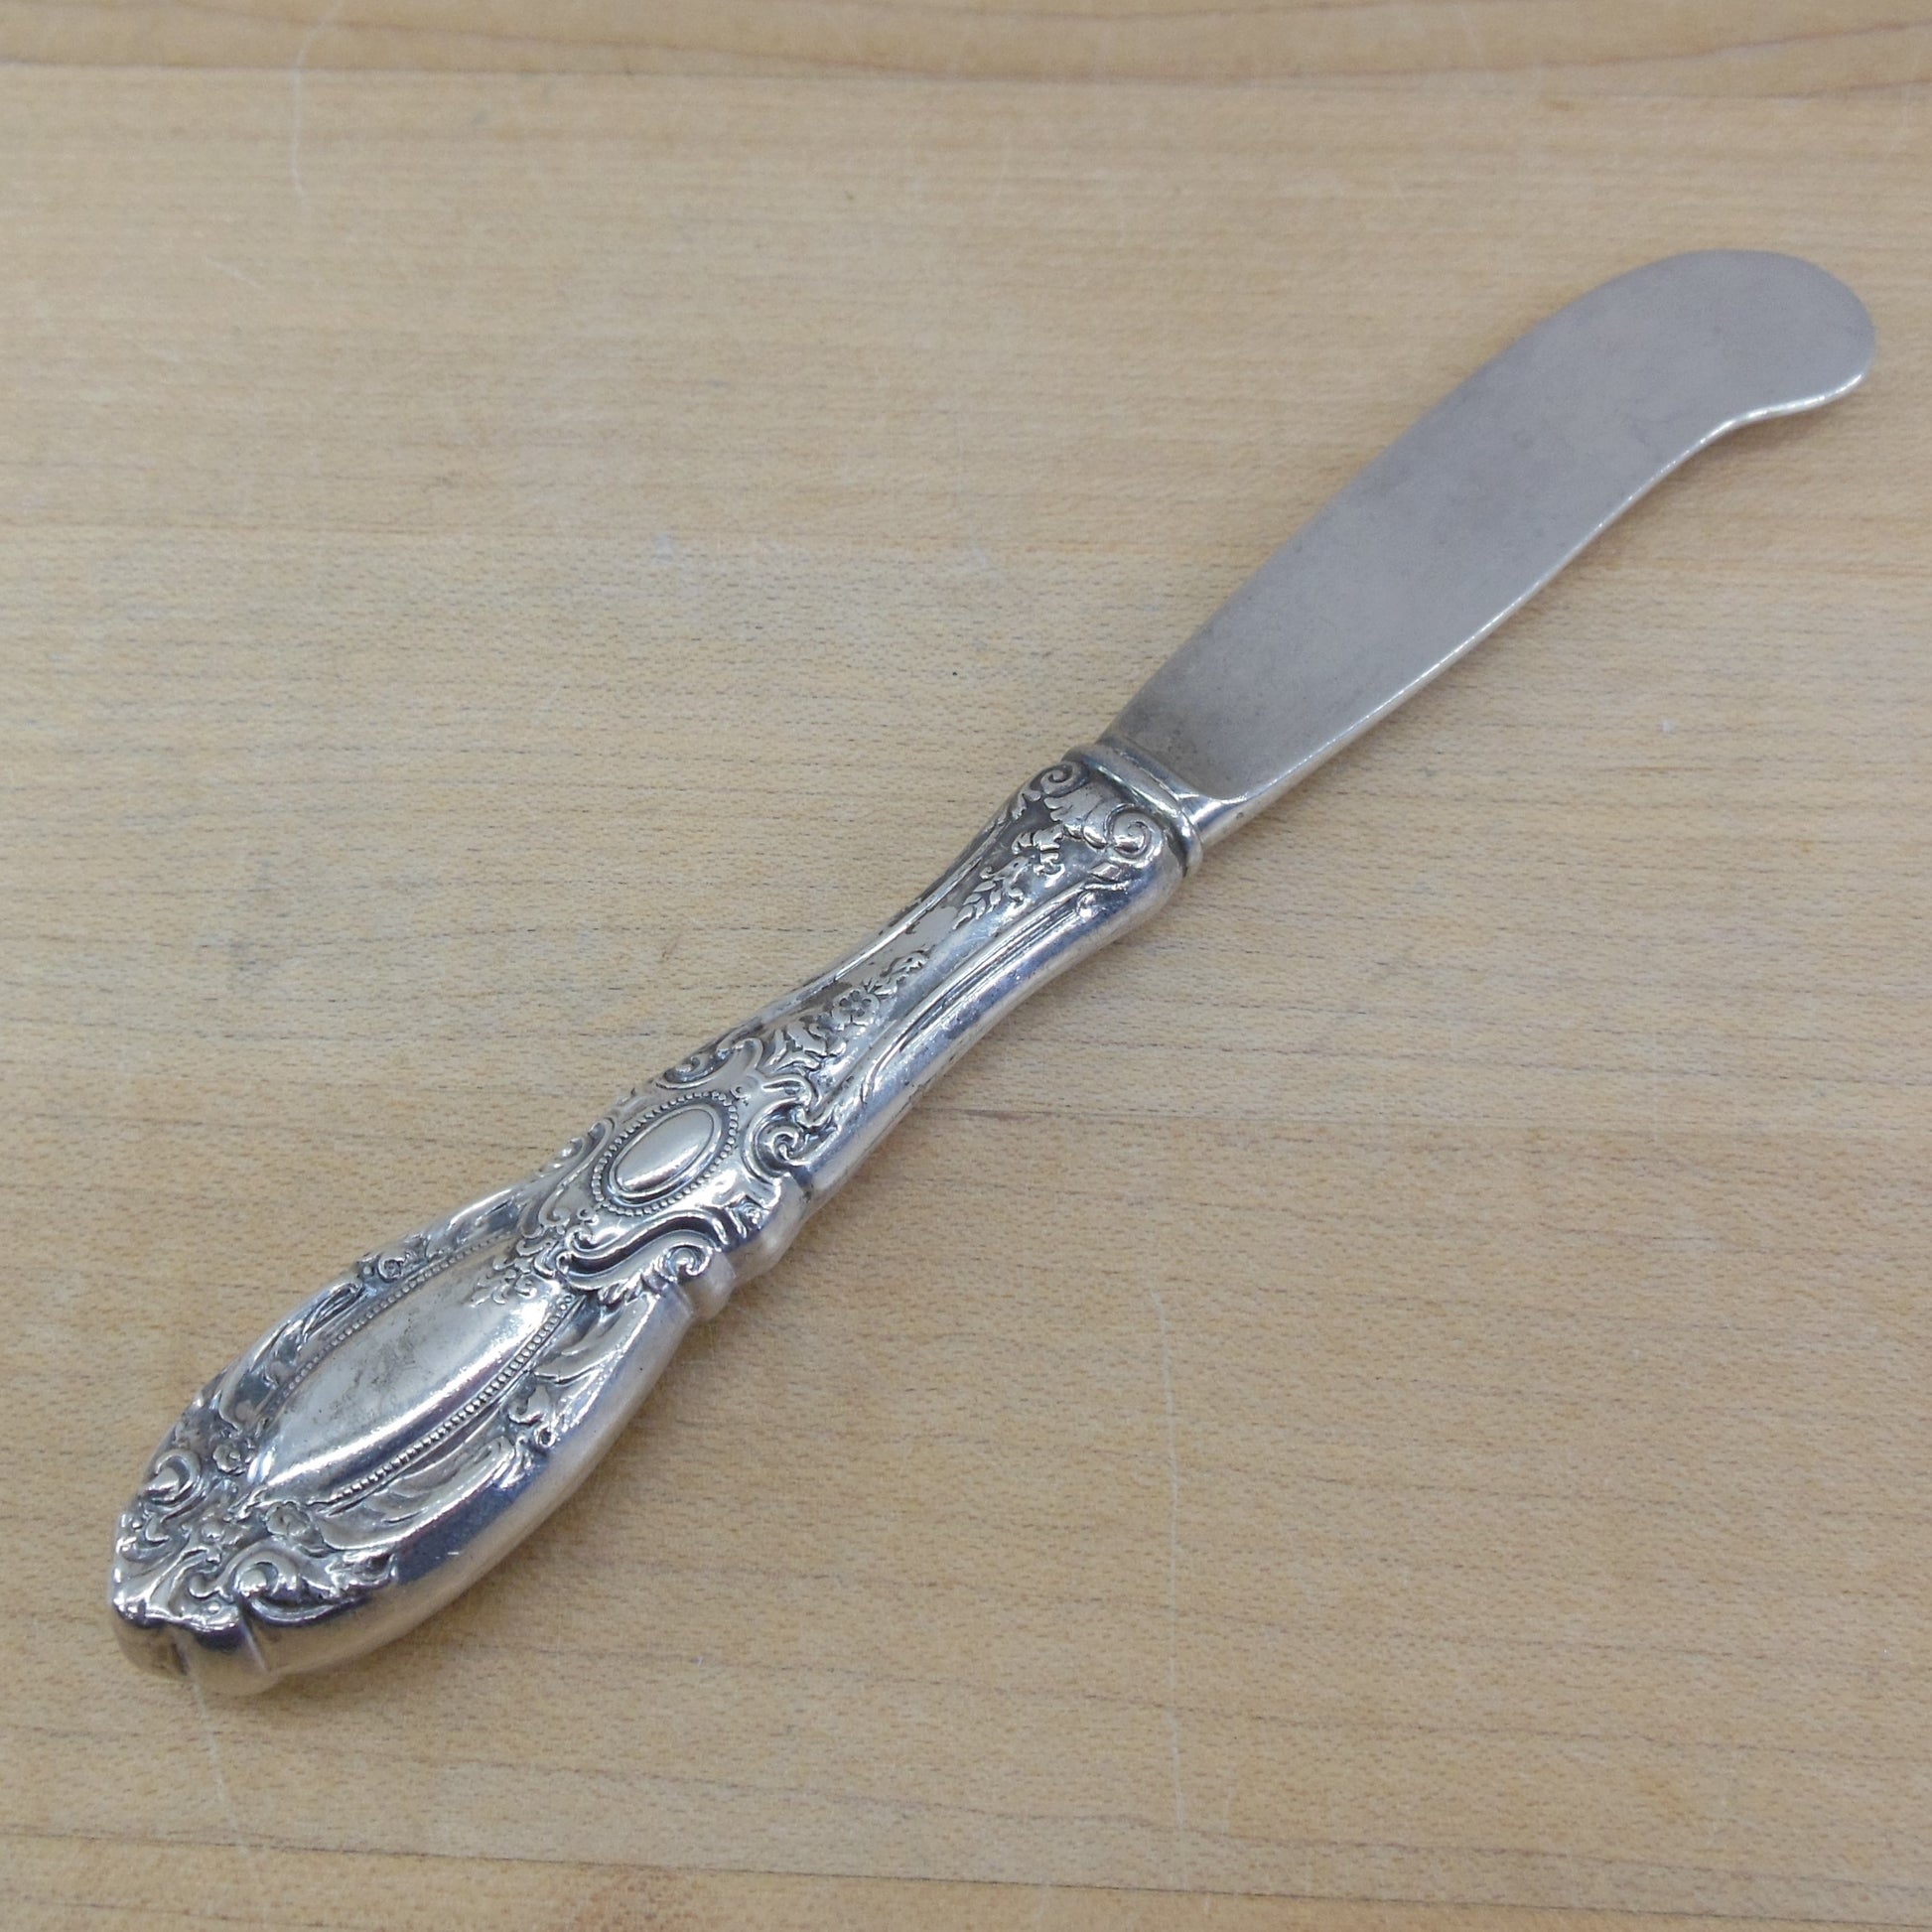 Towle King Richard Sterling Silver Flatware - Butter Spreader used